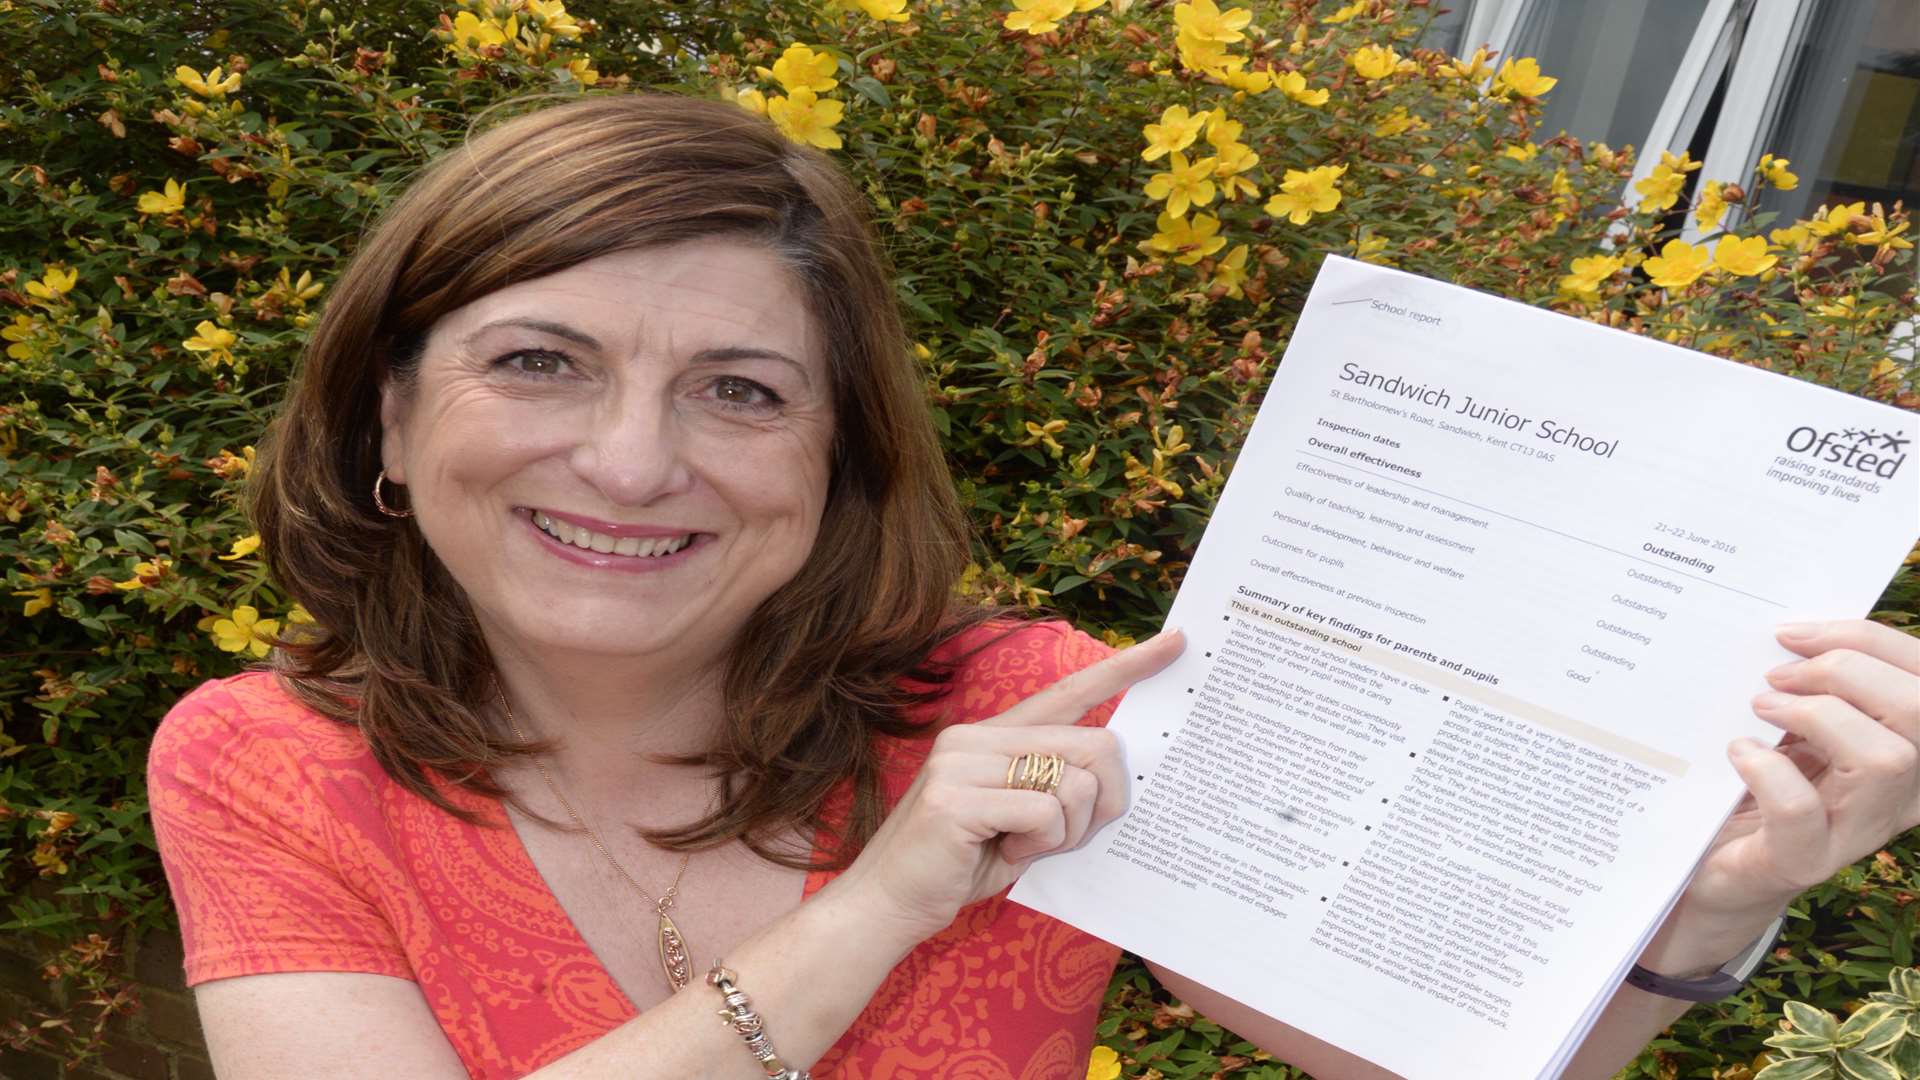 Head teacher Sheilagh Roberts with Sandwich Junior School's outstanding Ofsted report